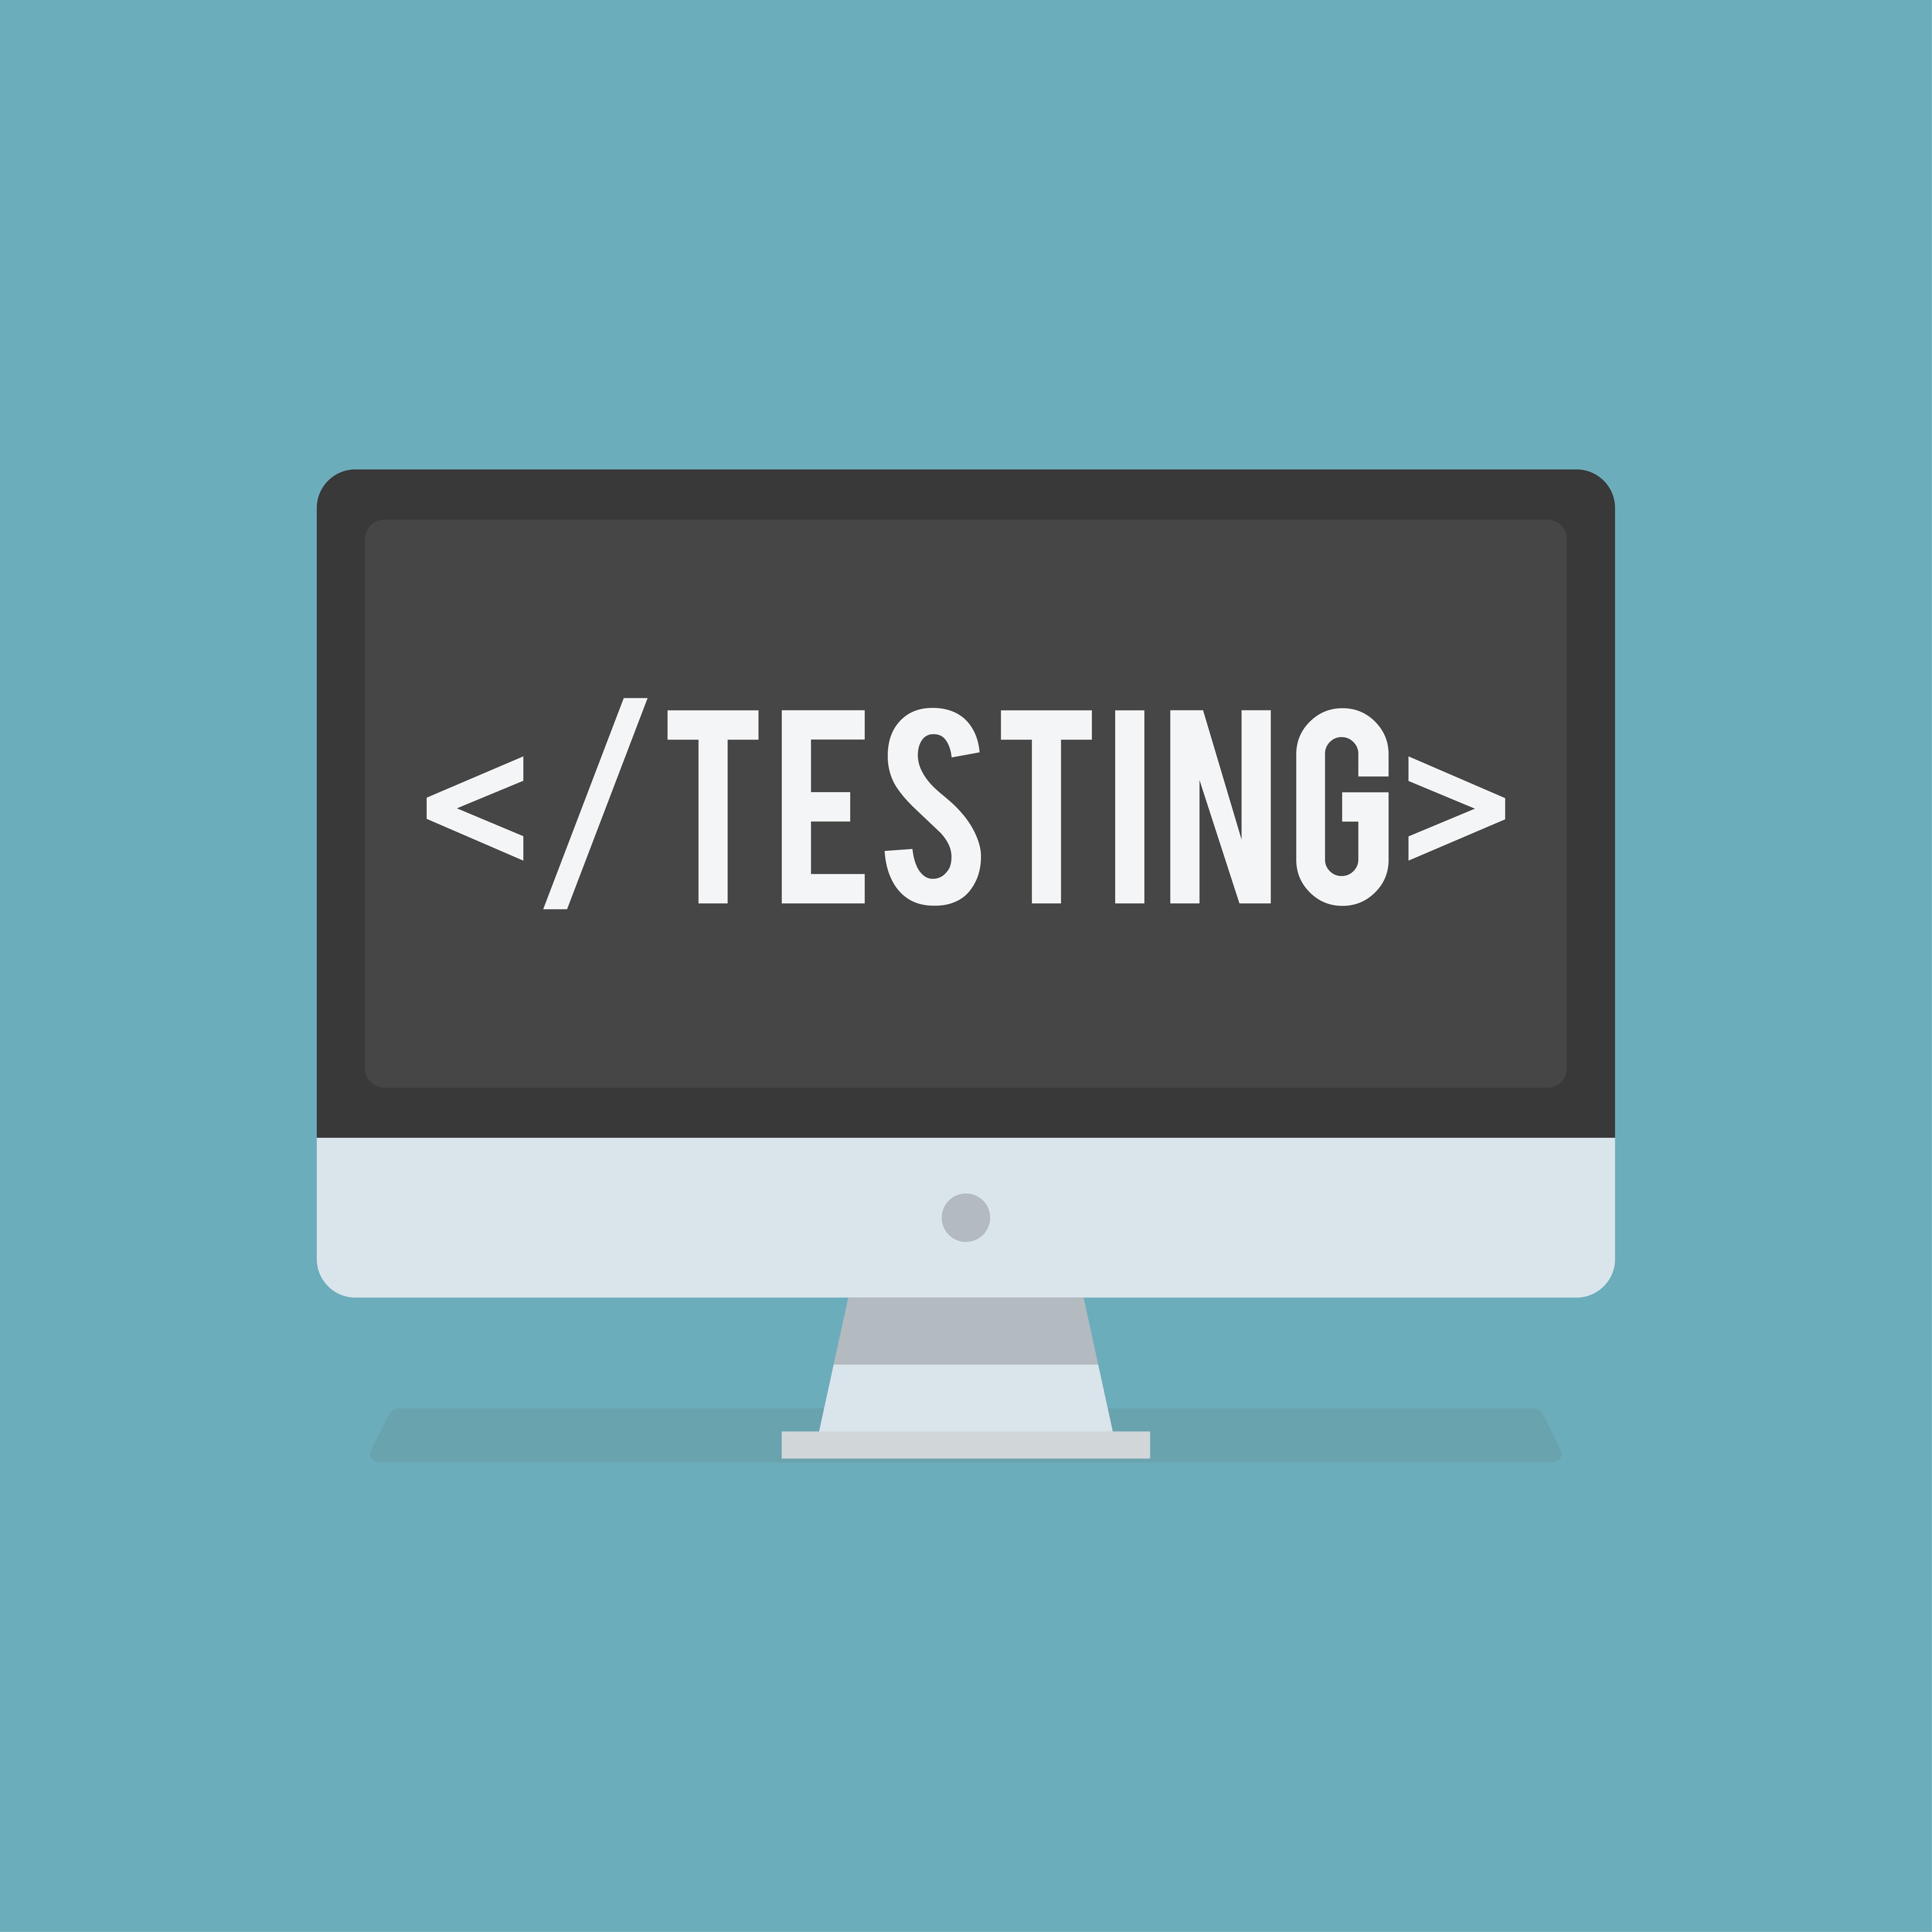 check the post:The Art of Testing Software for a description of the image 